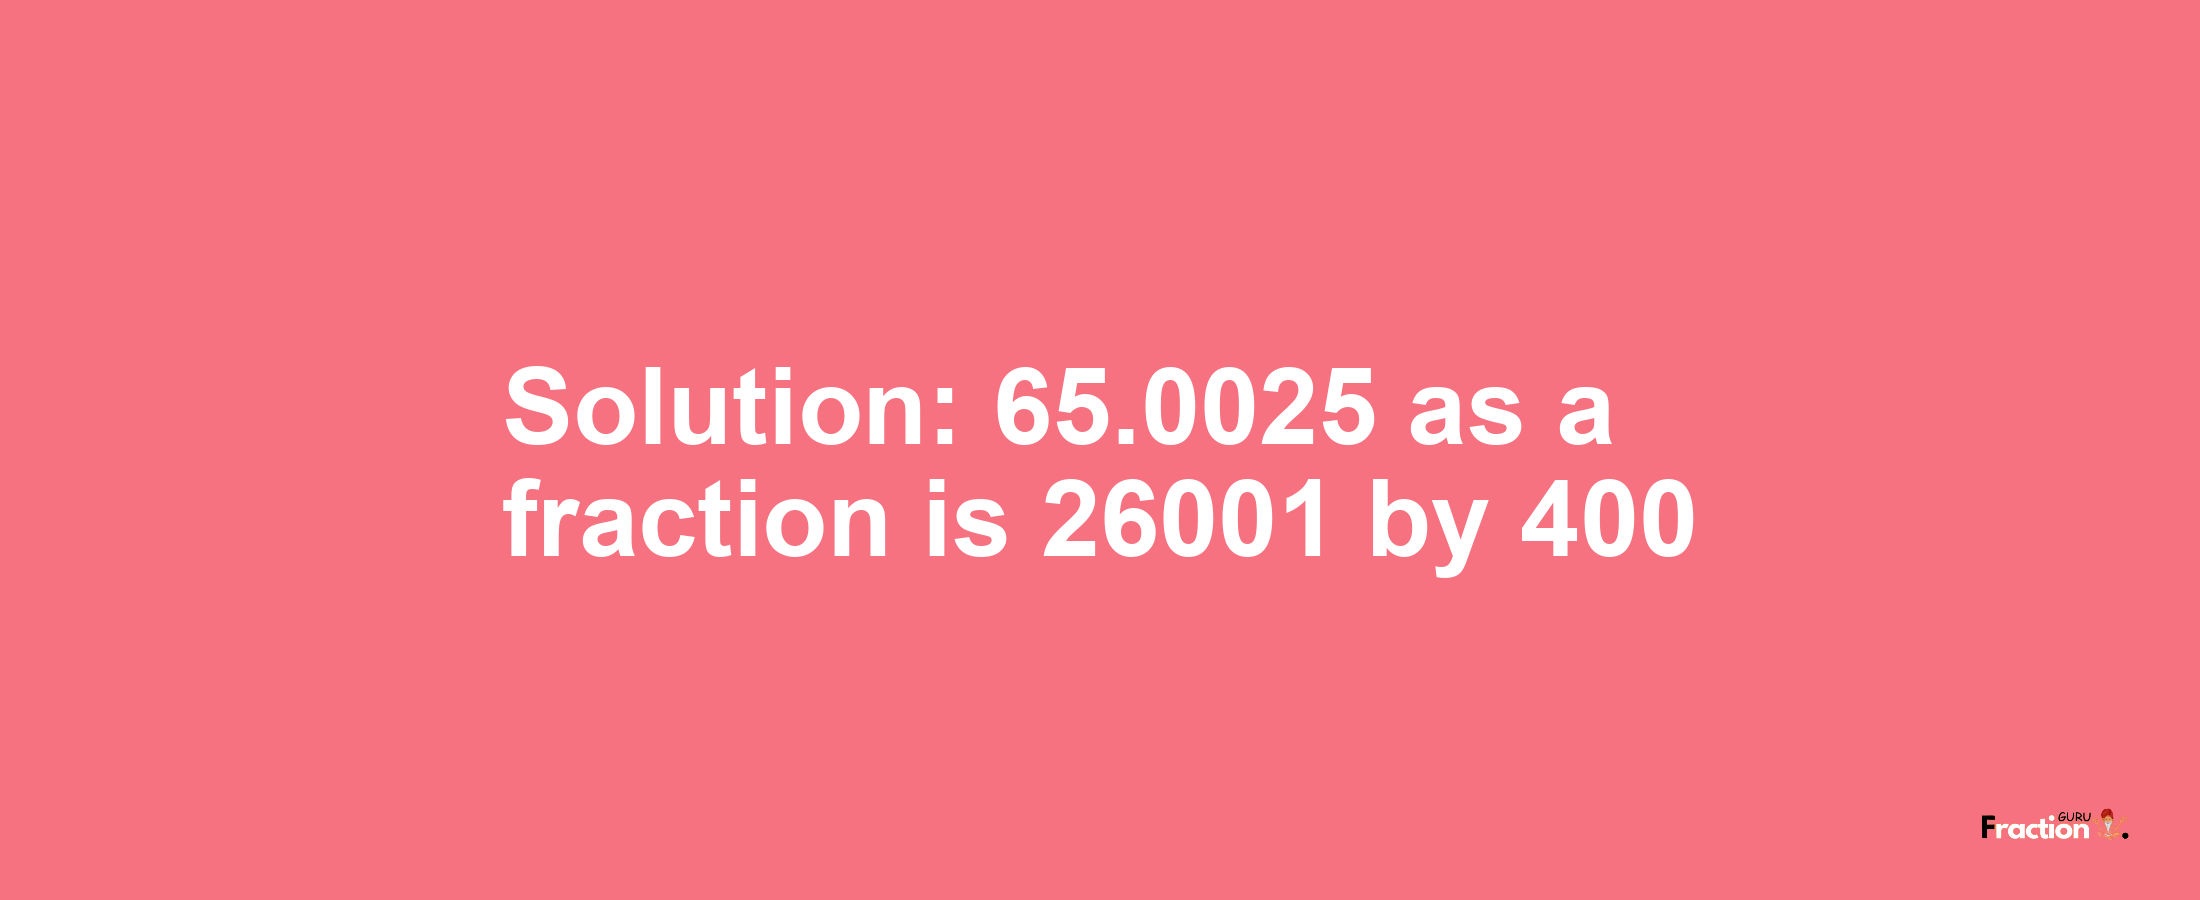 Solution:65.0025 as a fraction is 26001/400